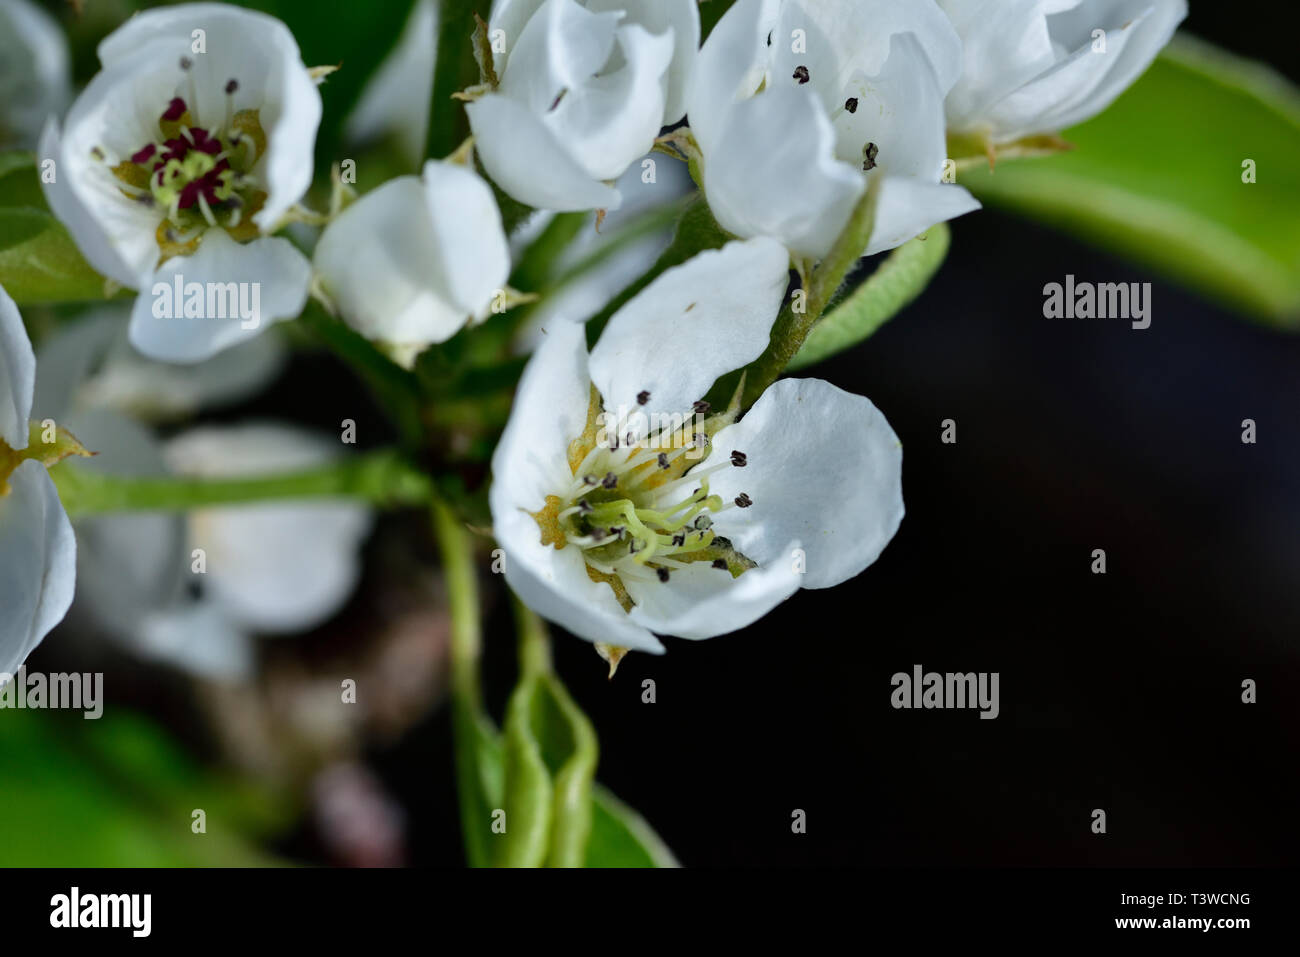 Close up of blossoms on pear tree (Pyrus communis), common pear in garden Stock Photo